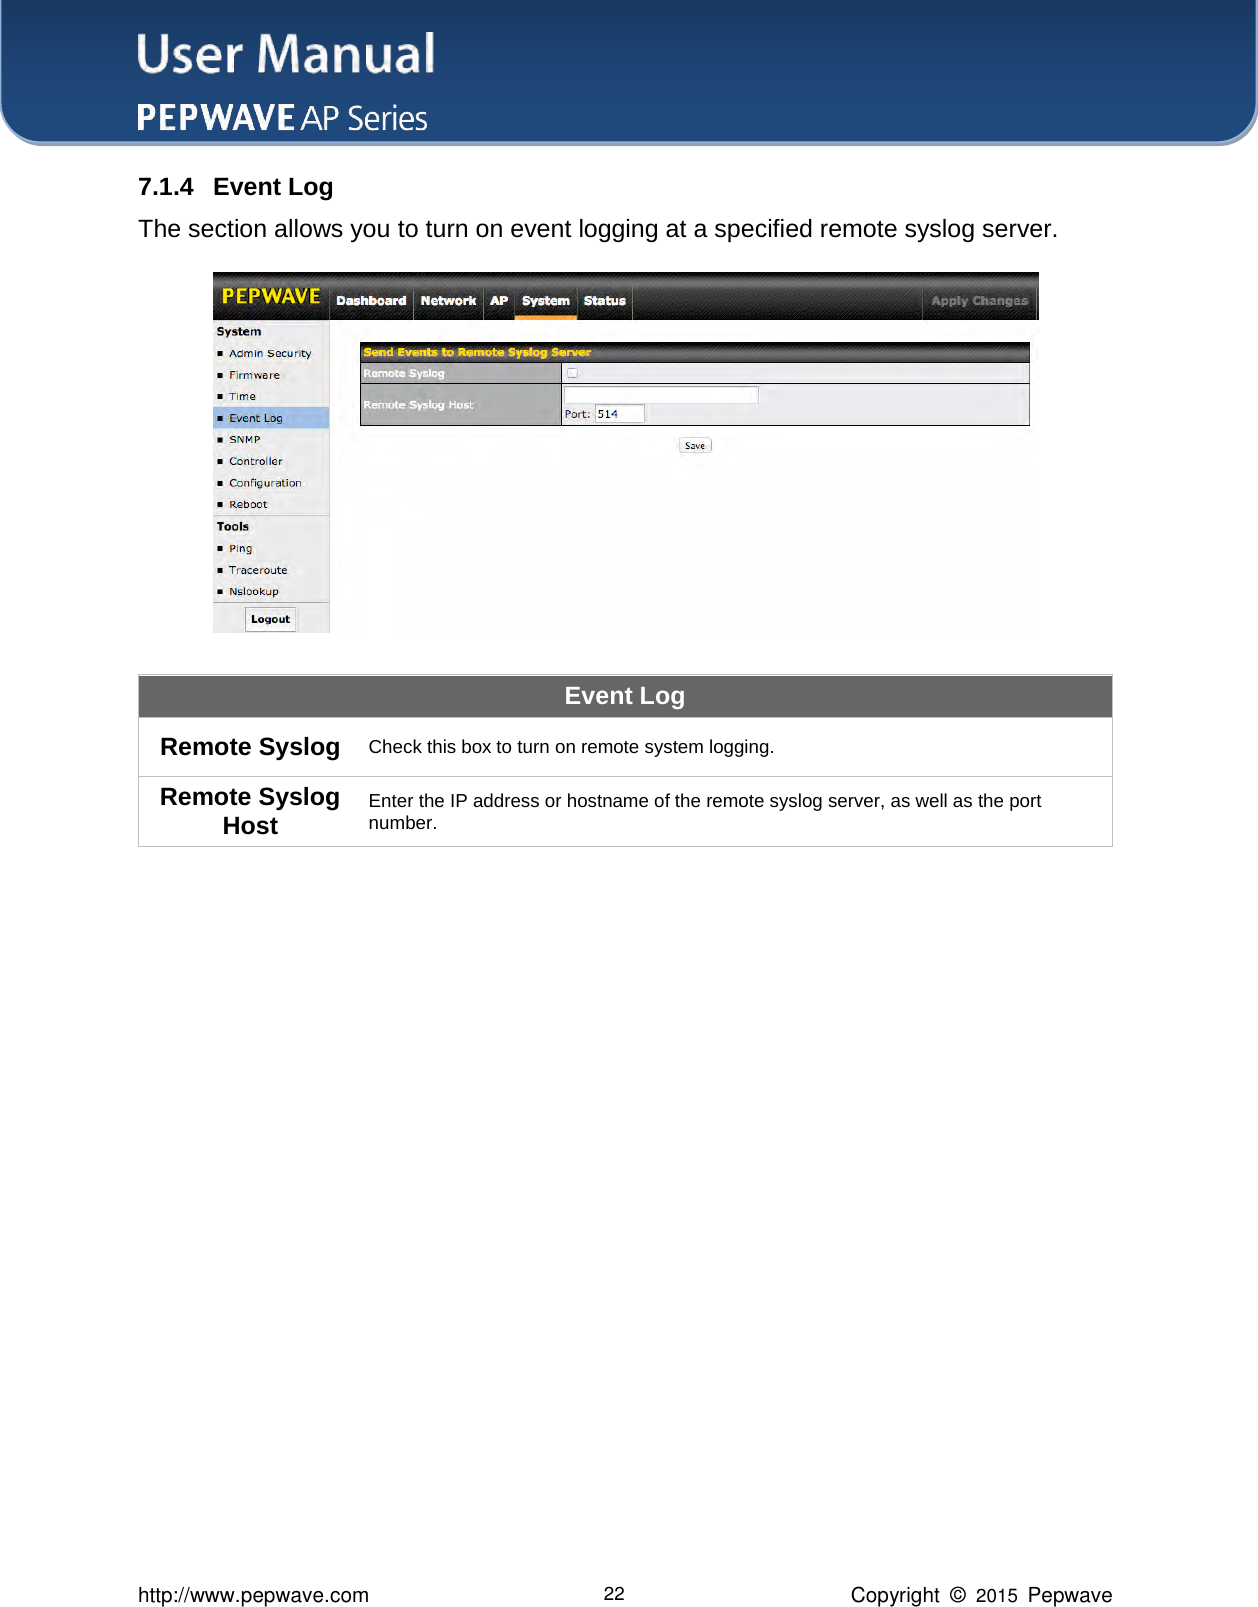 User Manual    http://www.pepwave.com 22 Copyright  ©  2015  Pepwave 7.1.4 Event Log The section allows you to turn on event logging at a specified remote syslog server.  Event Log Remote Syslog Check this box to turn on remote system logging. Remote Syslog Host Enter the IP address or hostname of the remote syslog server, as well as the port number.                 